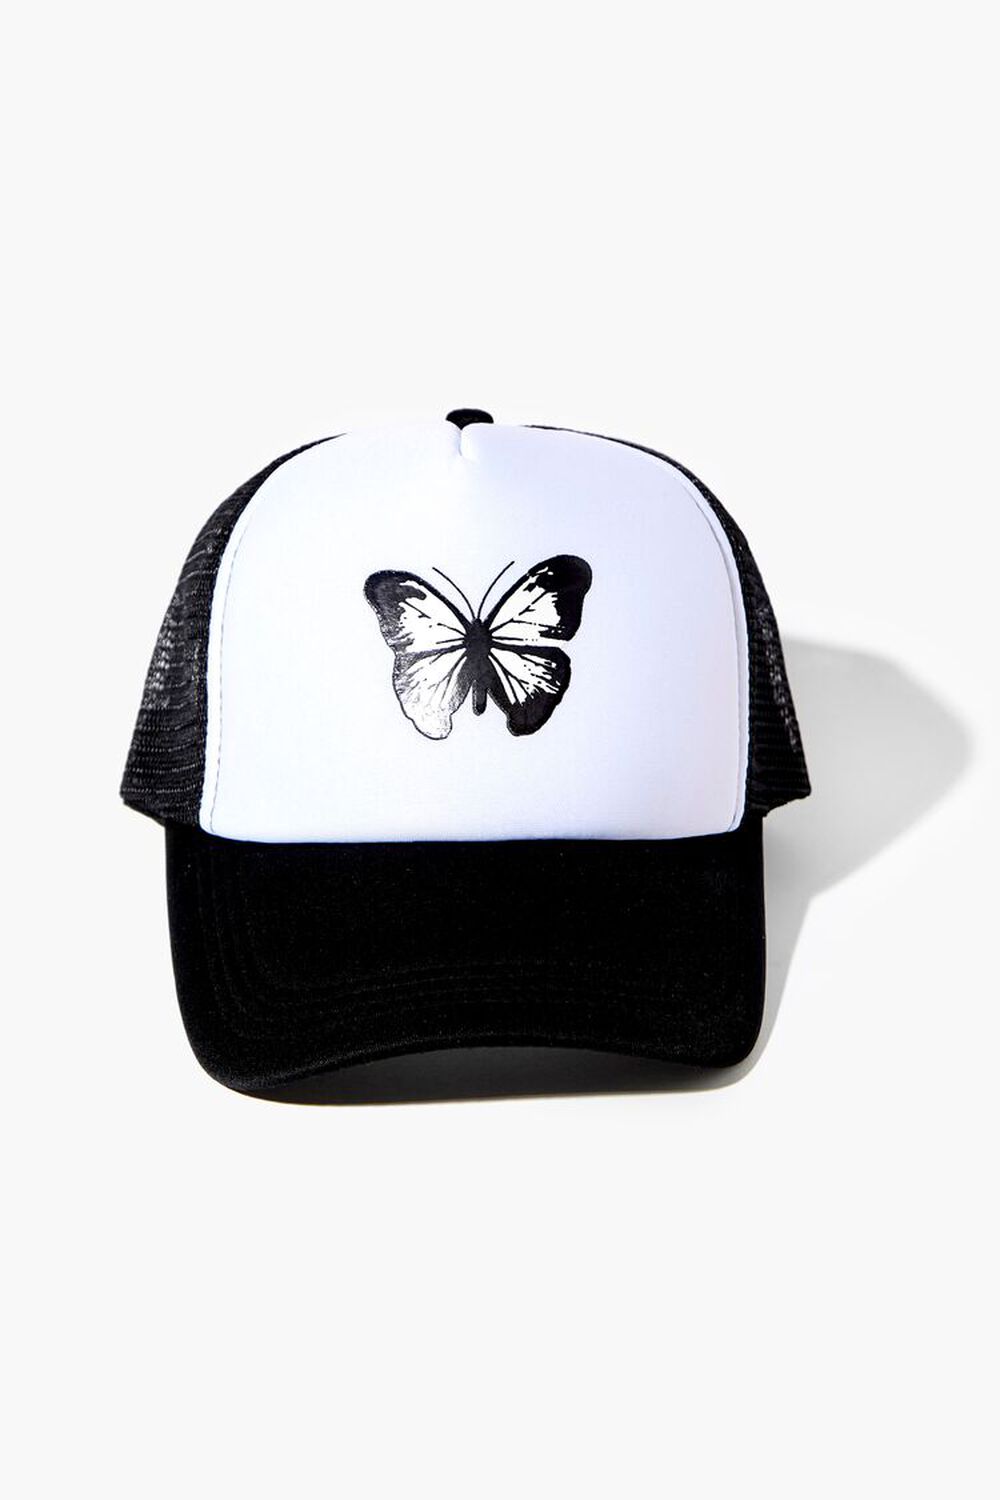 WHITE/BLACK Butterfly Graphic Trucker Hat, image 1